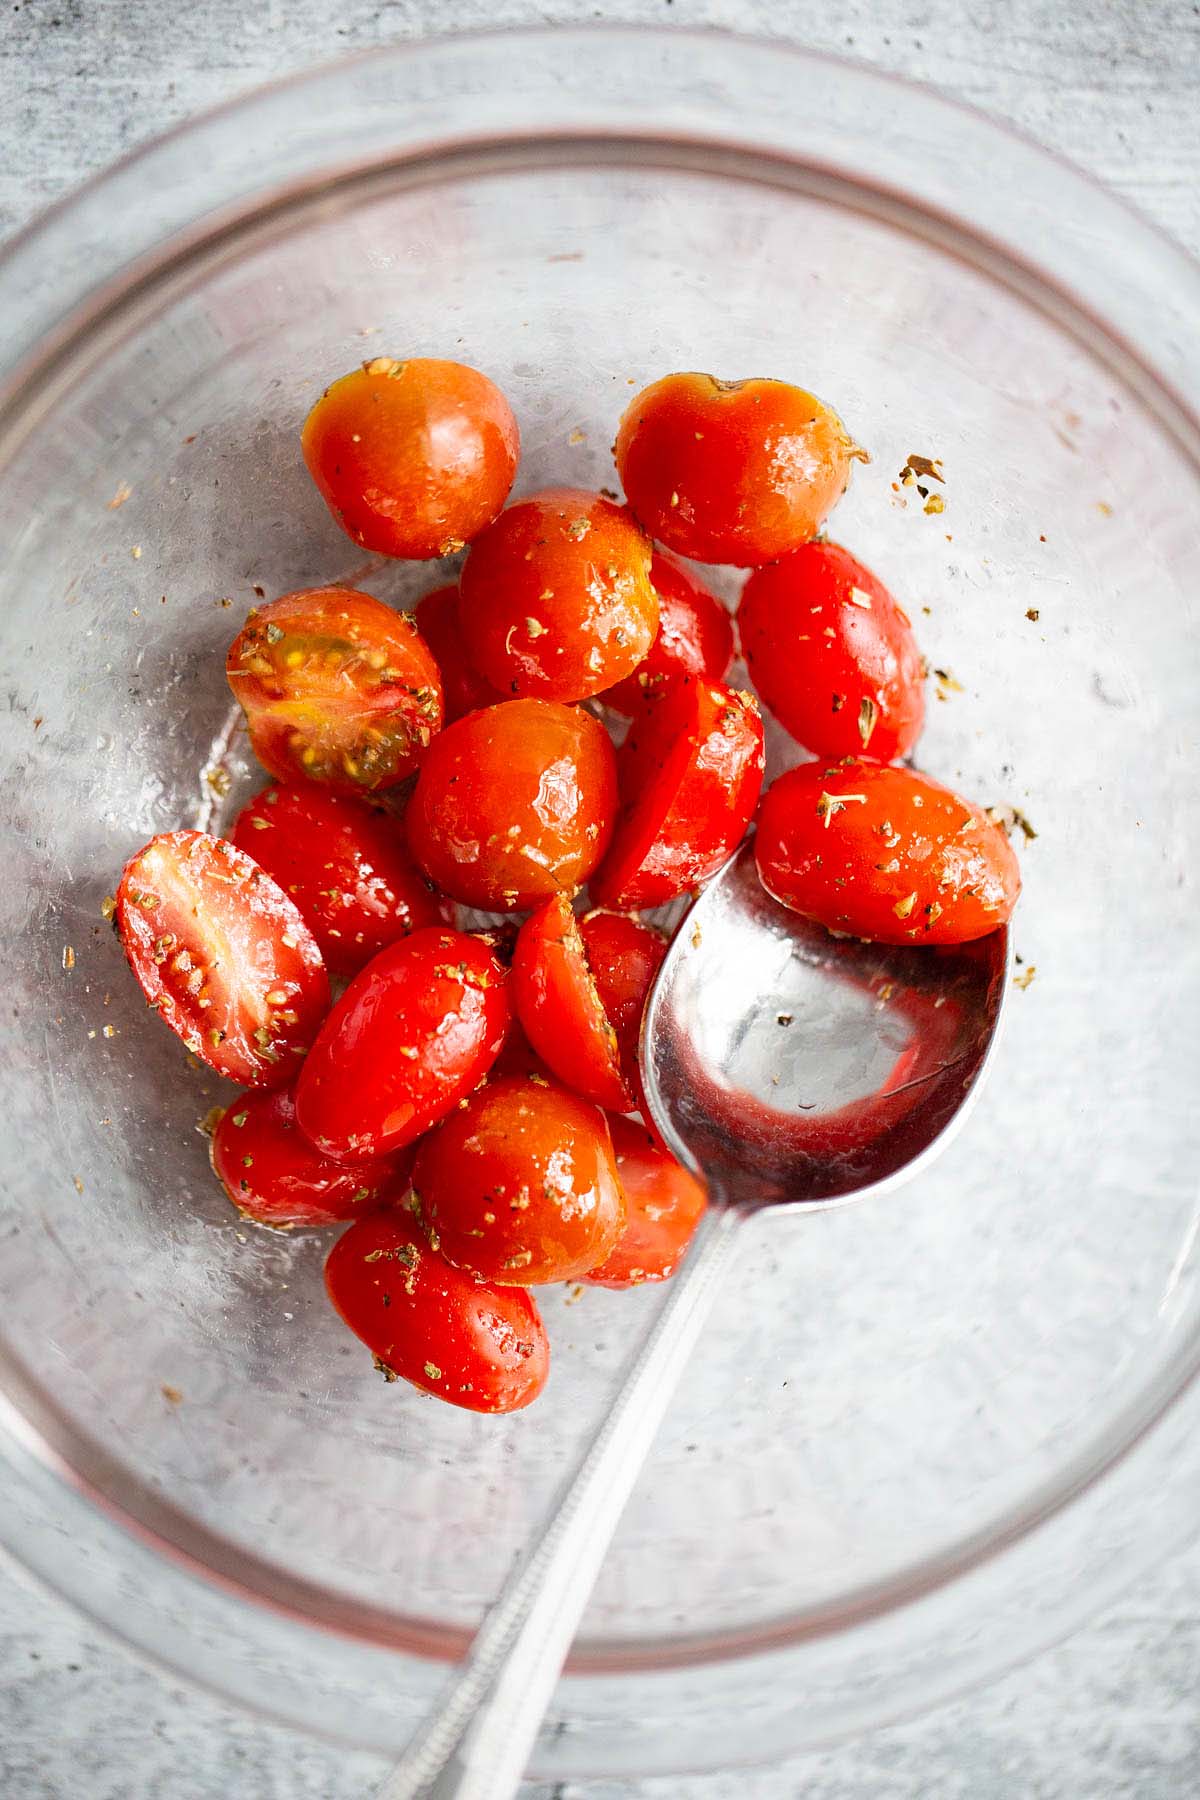 Tomatoes in a bowl.